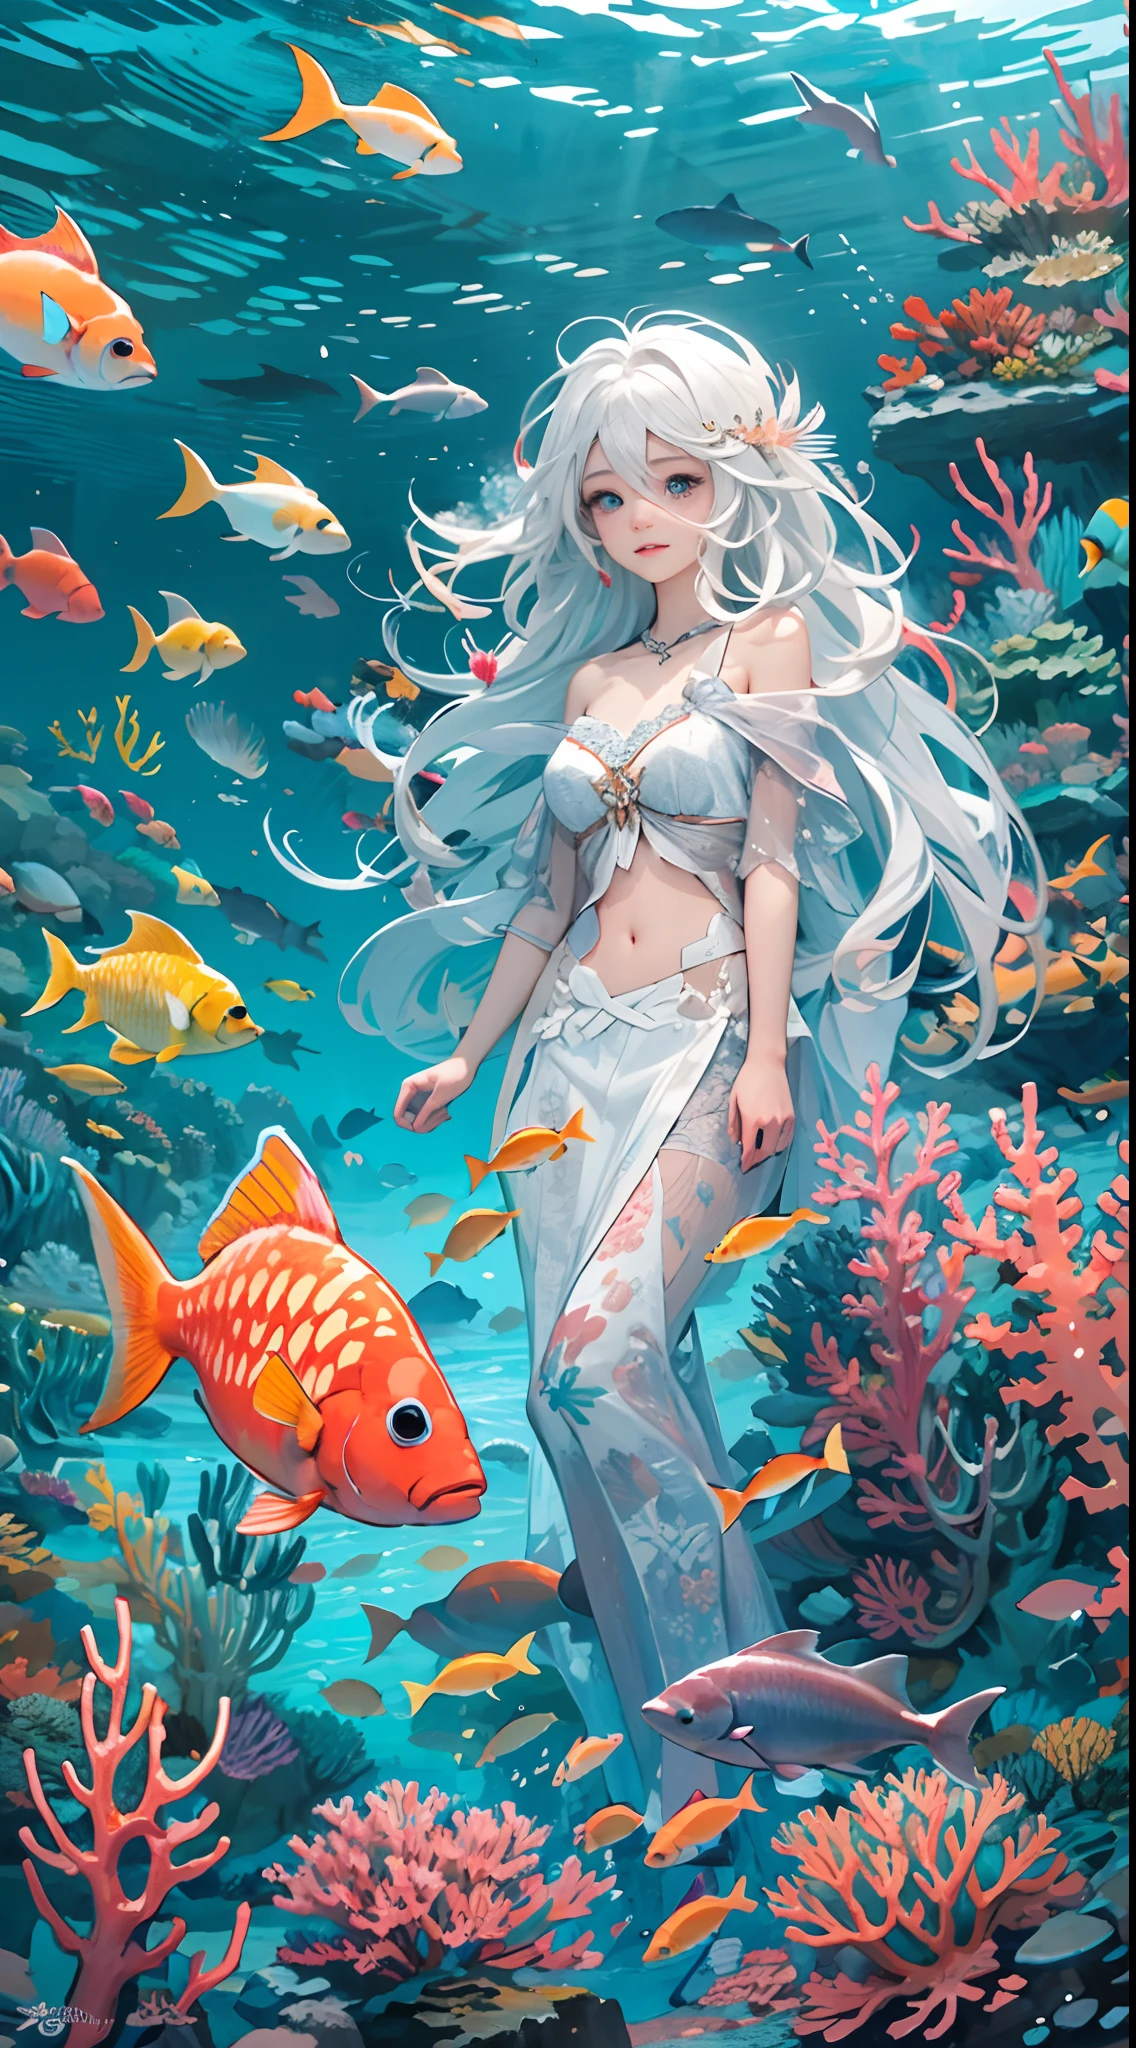 Conceptual art of marine life, Undersea landscape, Marine life，Beautiful coral reefs come in different shapes，3D，Fish, Female animated fantasy illustration. Long white hair scattered in the sea, Drift, Very harmonious. The whole painting adopts a messy and imaginative painting style. The colors are bright and saturated, line sleek. The mystery and beauty of the ocean, The painting depicts an underwater world full of life and vitality, Animated art wallpapers，8 k